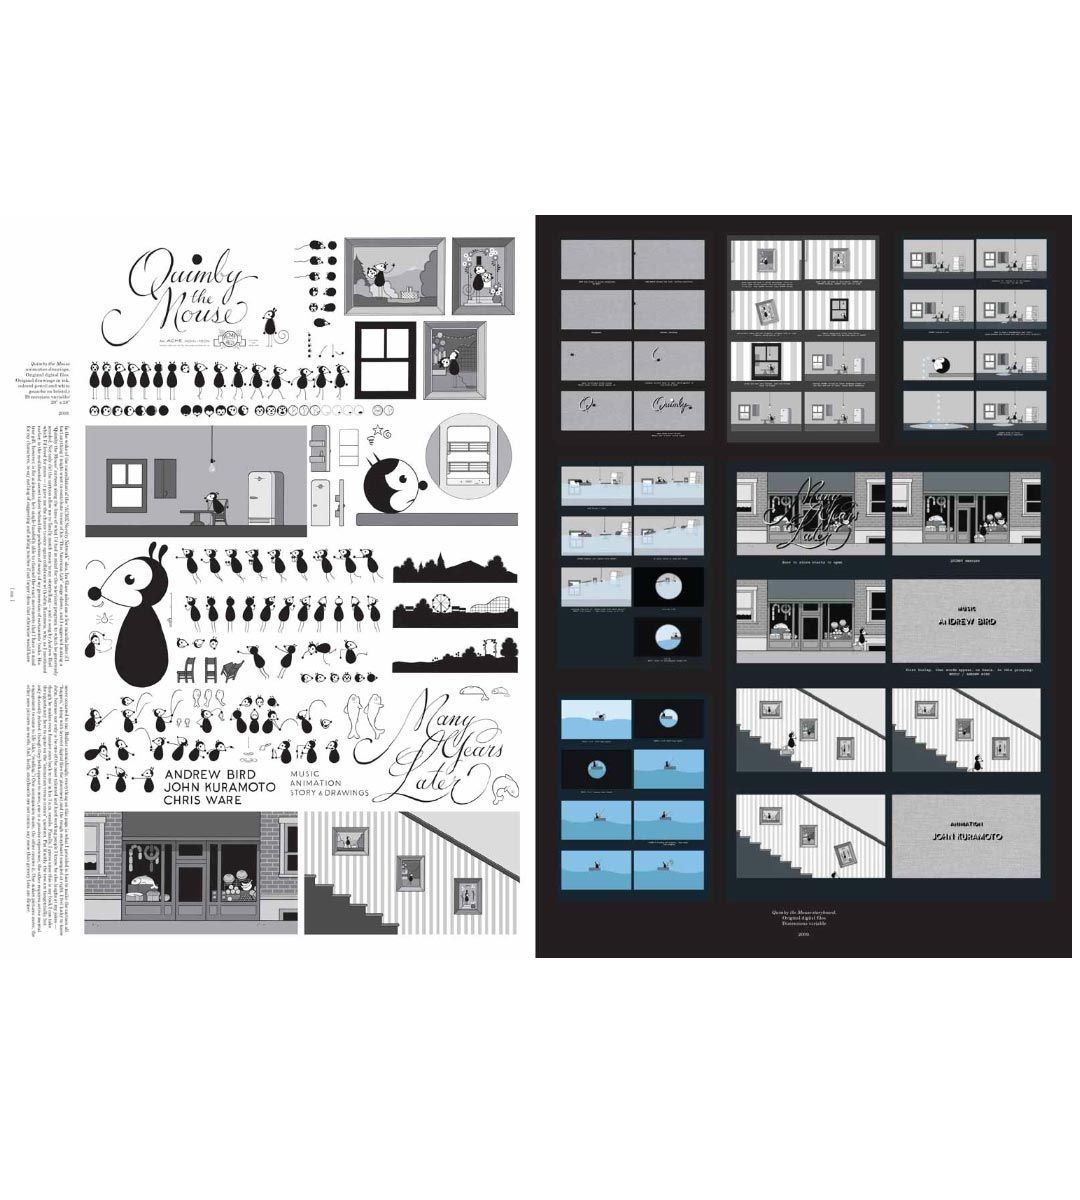 Monograph by Chris Ware (edition 2020)